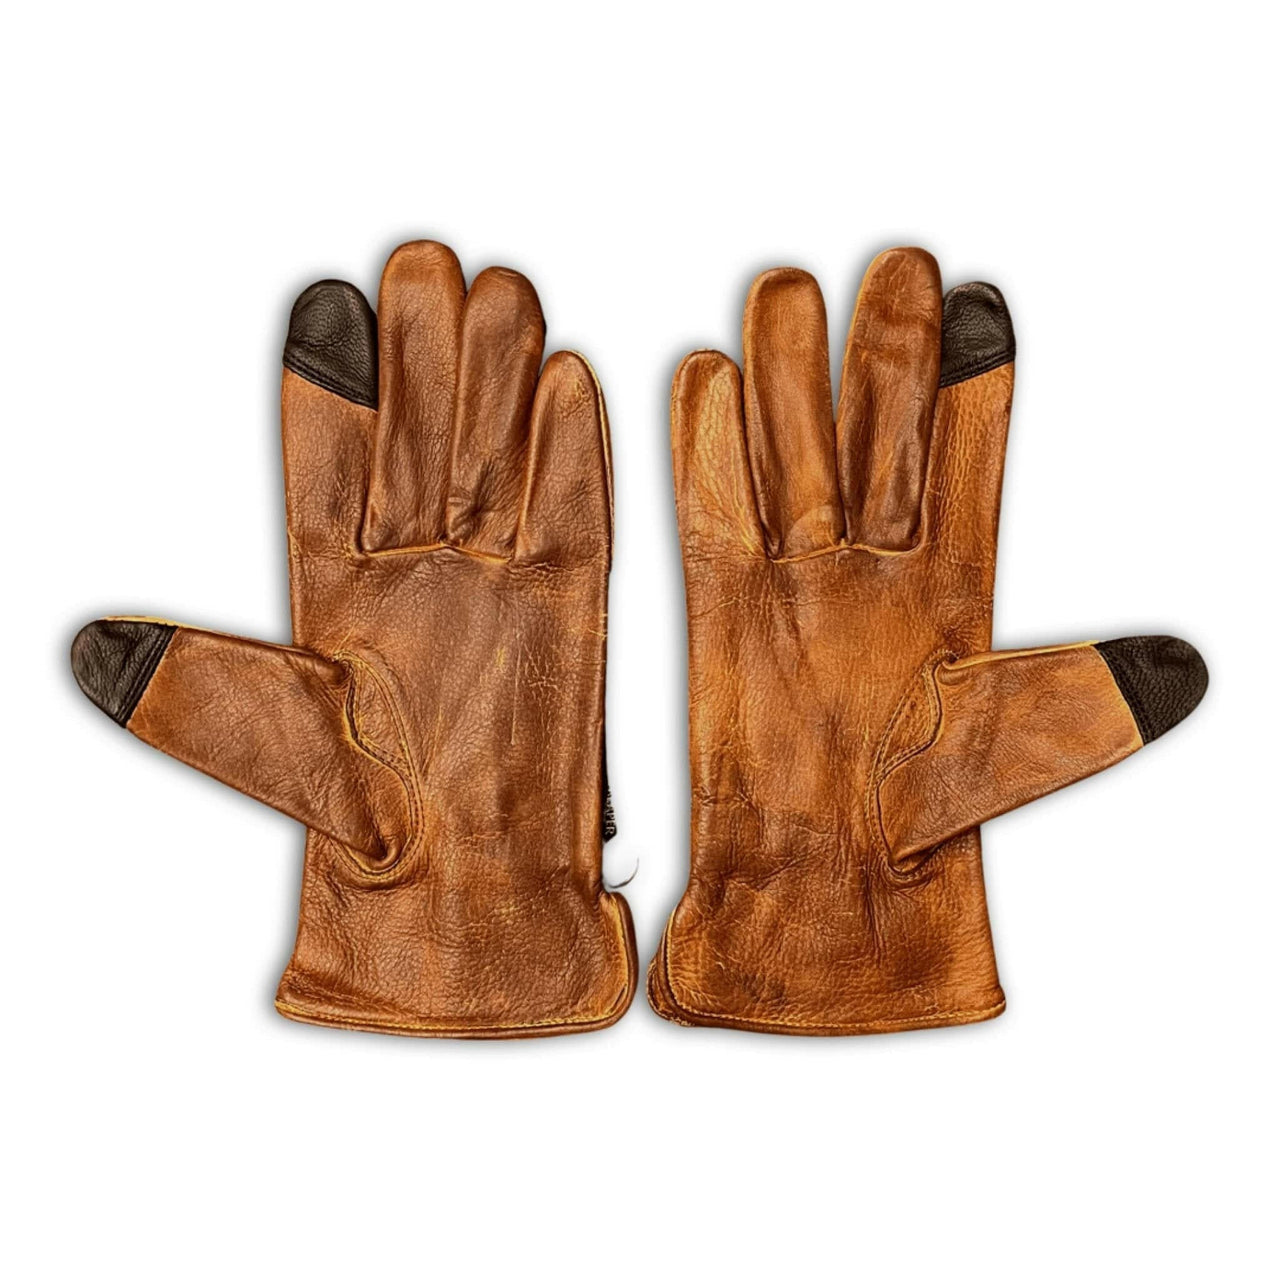 Leather Motorcycle Riding Gloves - Classic Roper - Distressed Brown - Rebel Reaper Clothing CompanyLeather Gloves